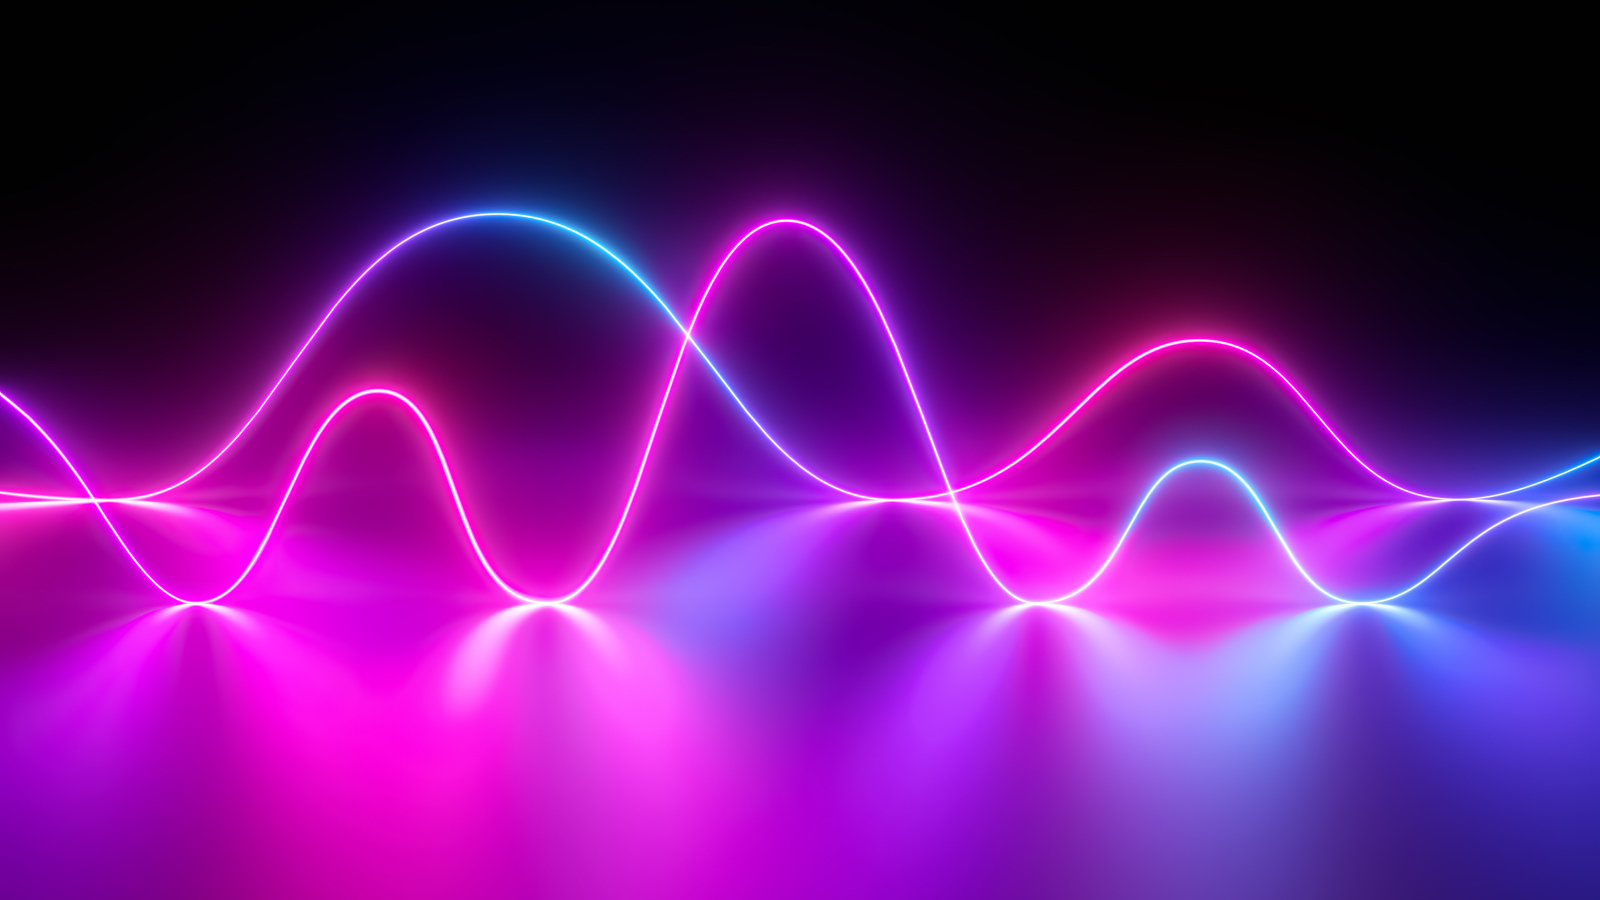 Neon waves on a lilac background